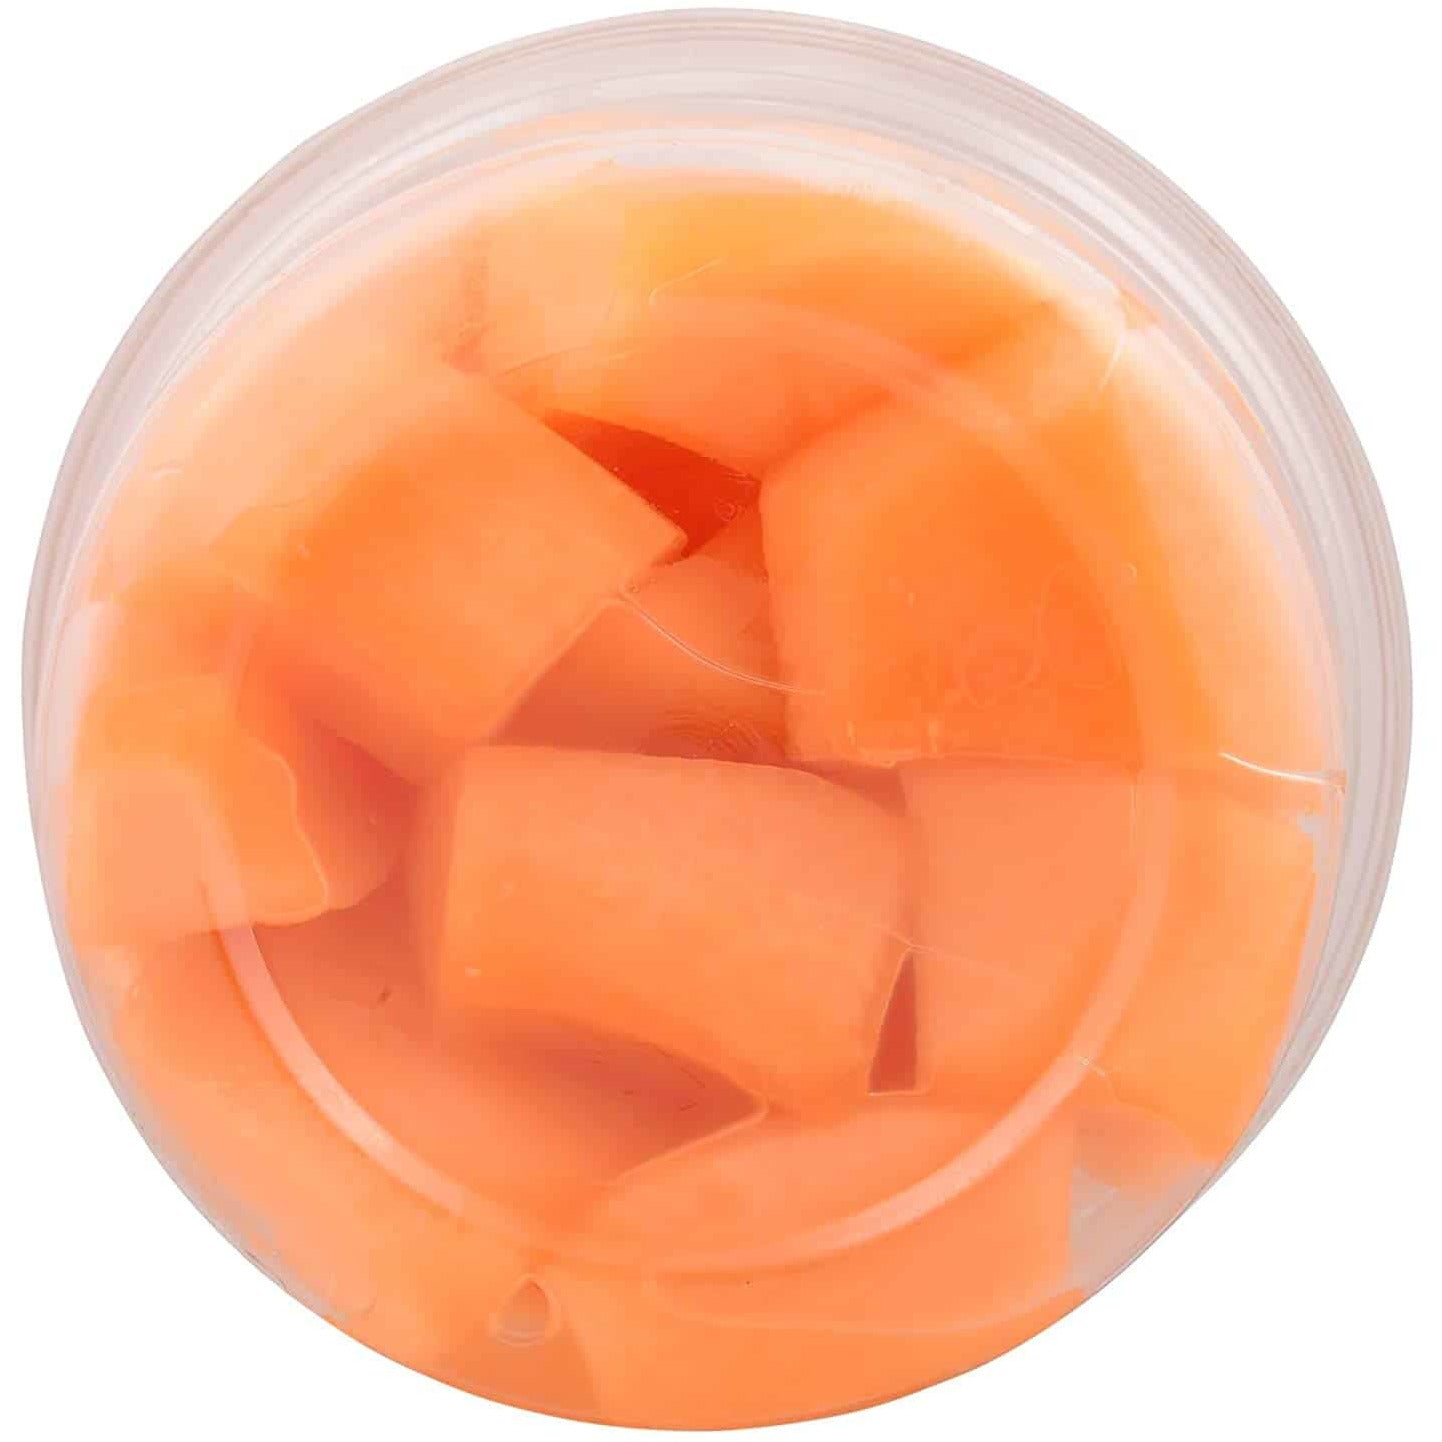 Oasis Fresh Conventional Cantaloupe Chunks (Value Pack) 2lbs